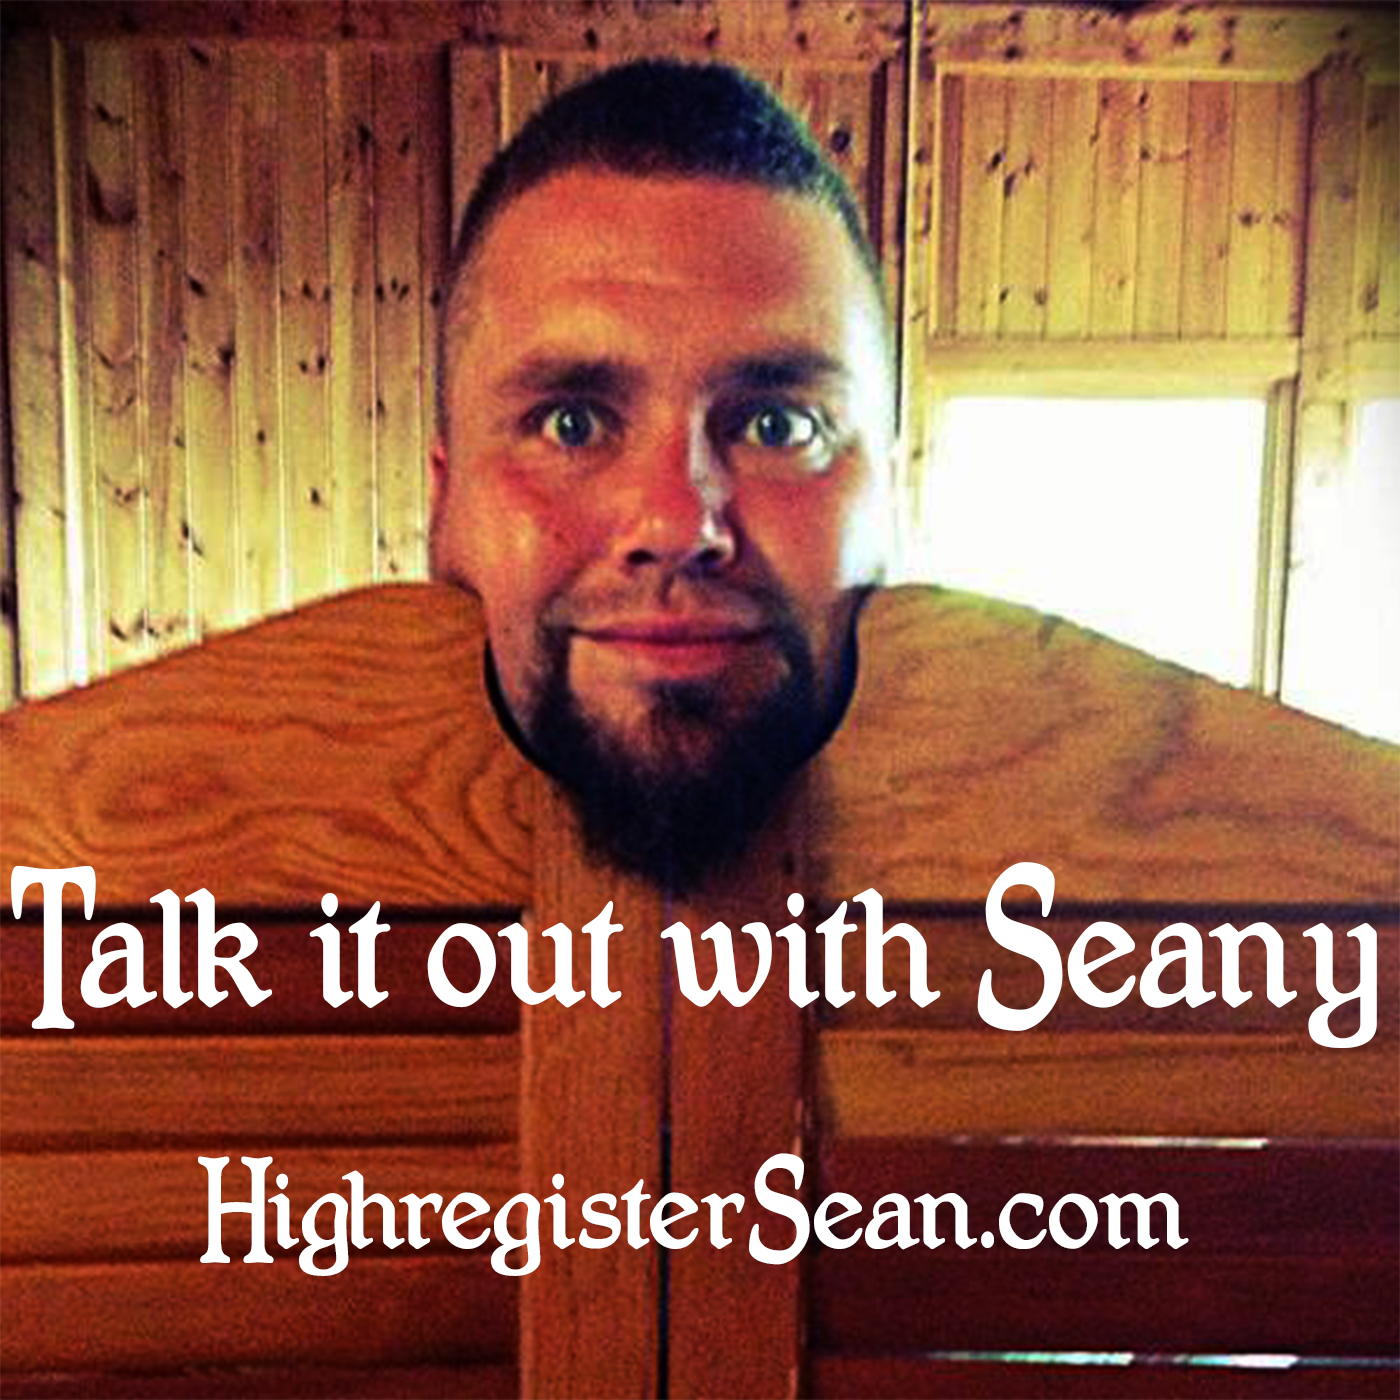 Talk it out with Seany